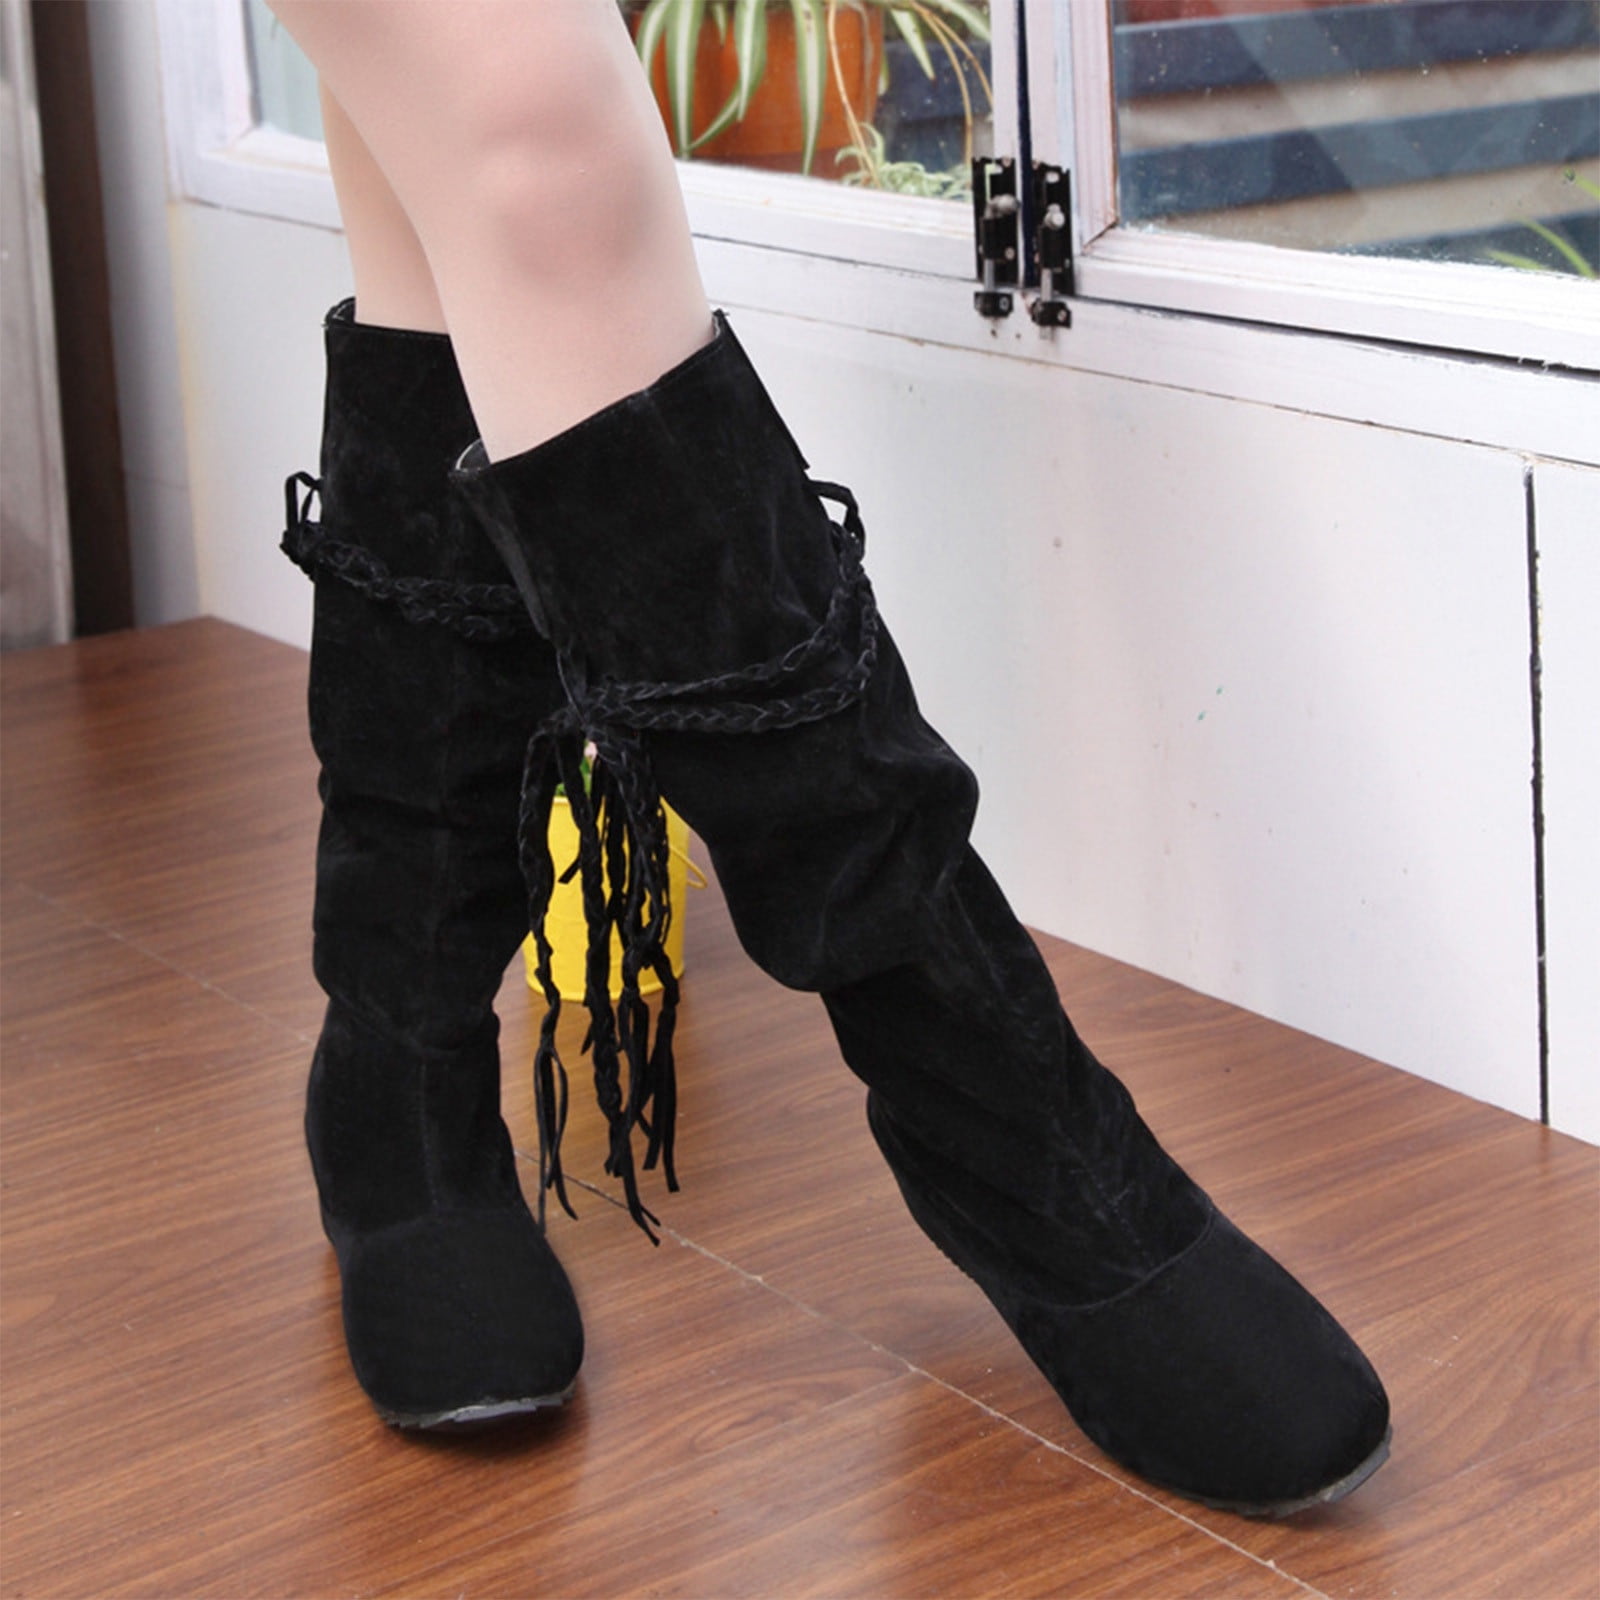 Party Shoe elastic Heel Pull On Mid Calf Boots plus size women's 